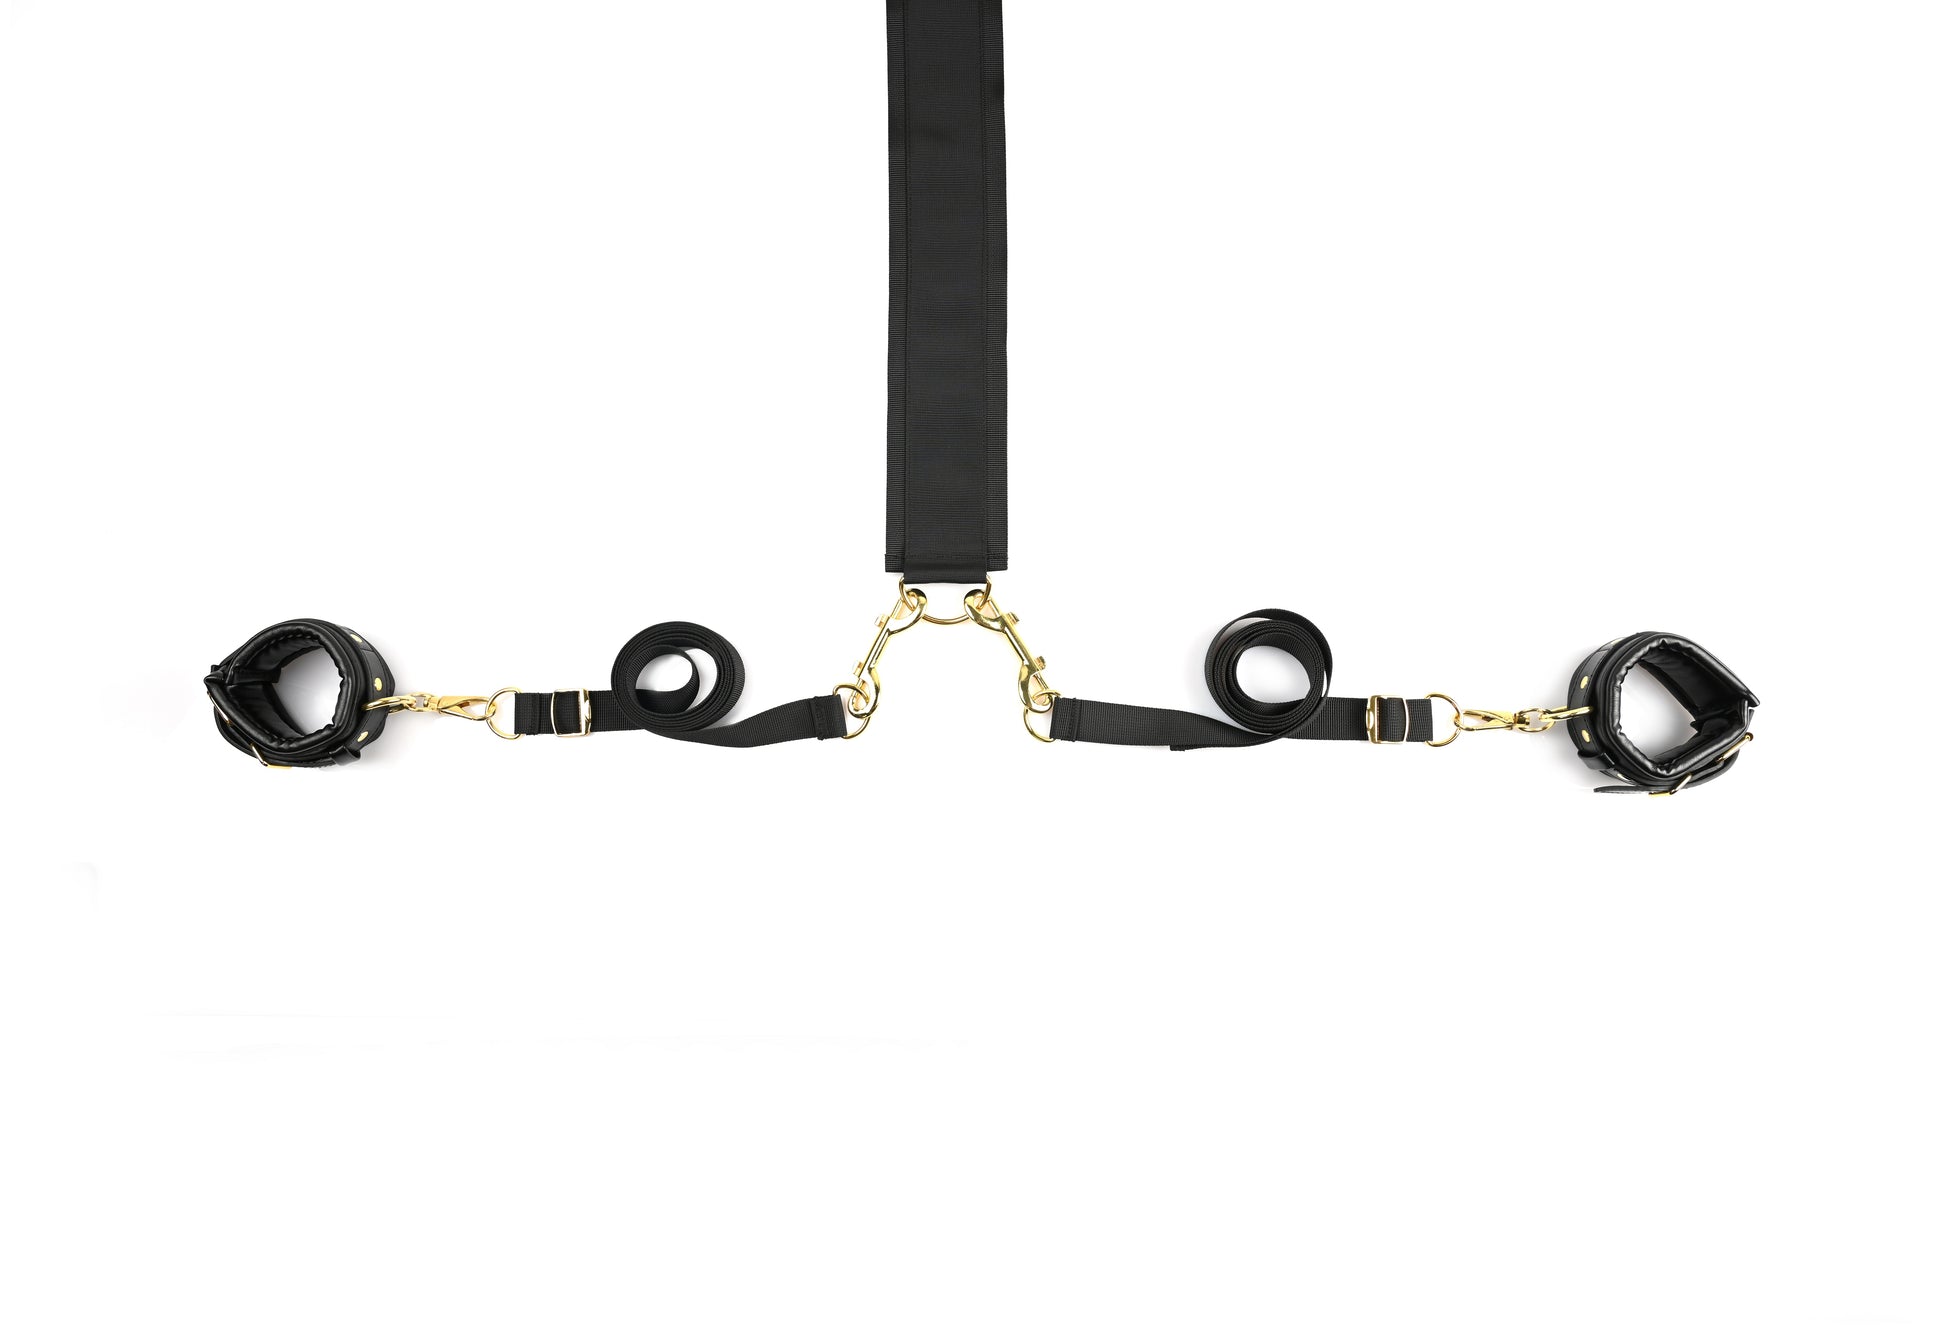 Close-up of the anchor strap with 2 of the adjustable restraint cuff attachments shown.